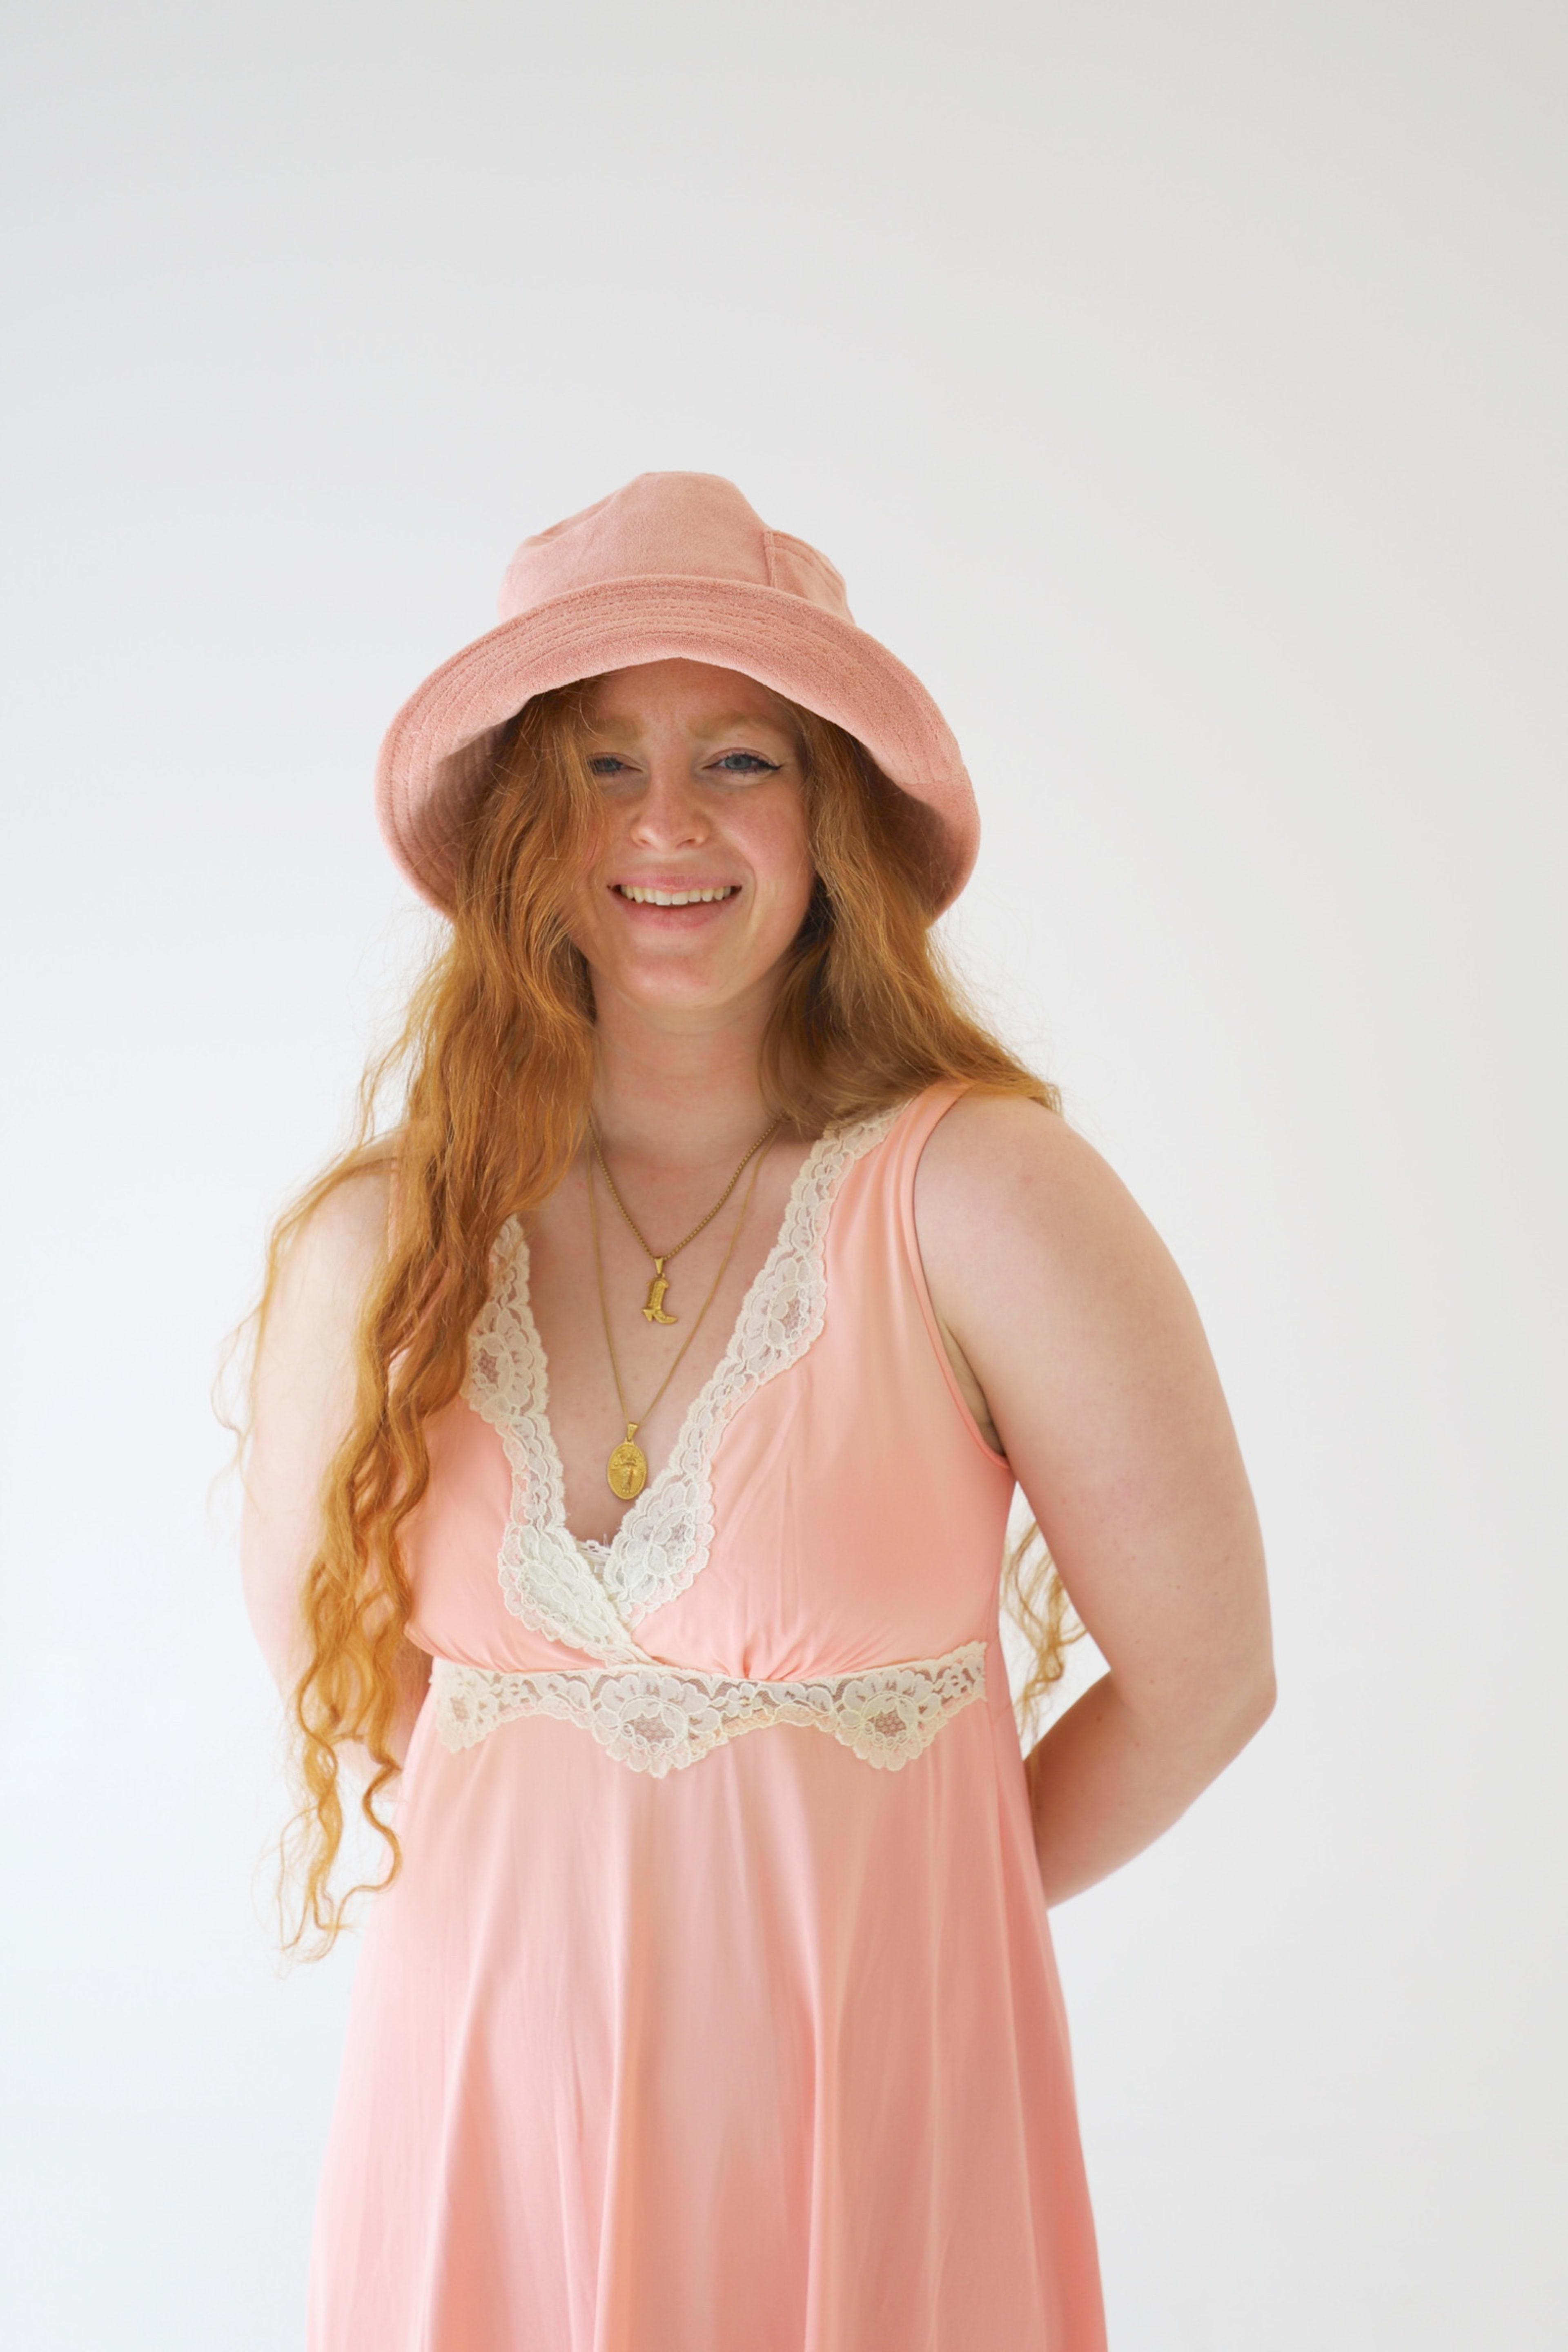 A fashion photoshoot featuring a woman in a pink dress and hat.